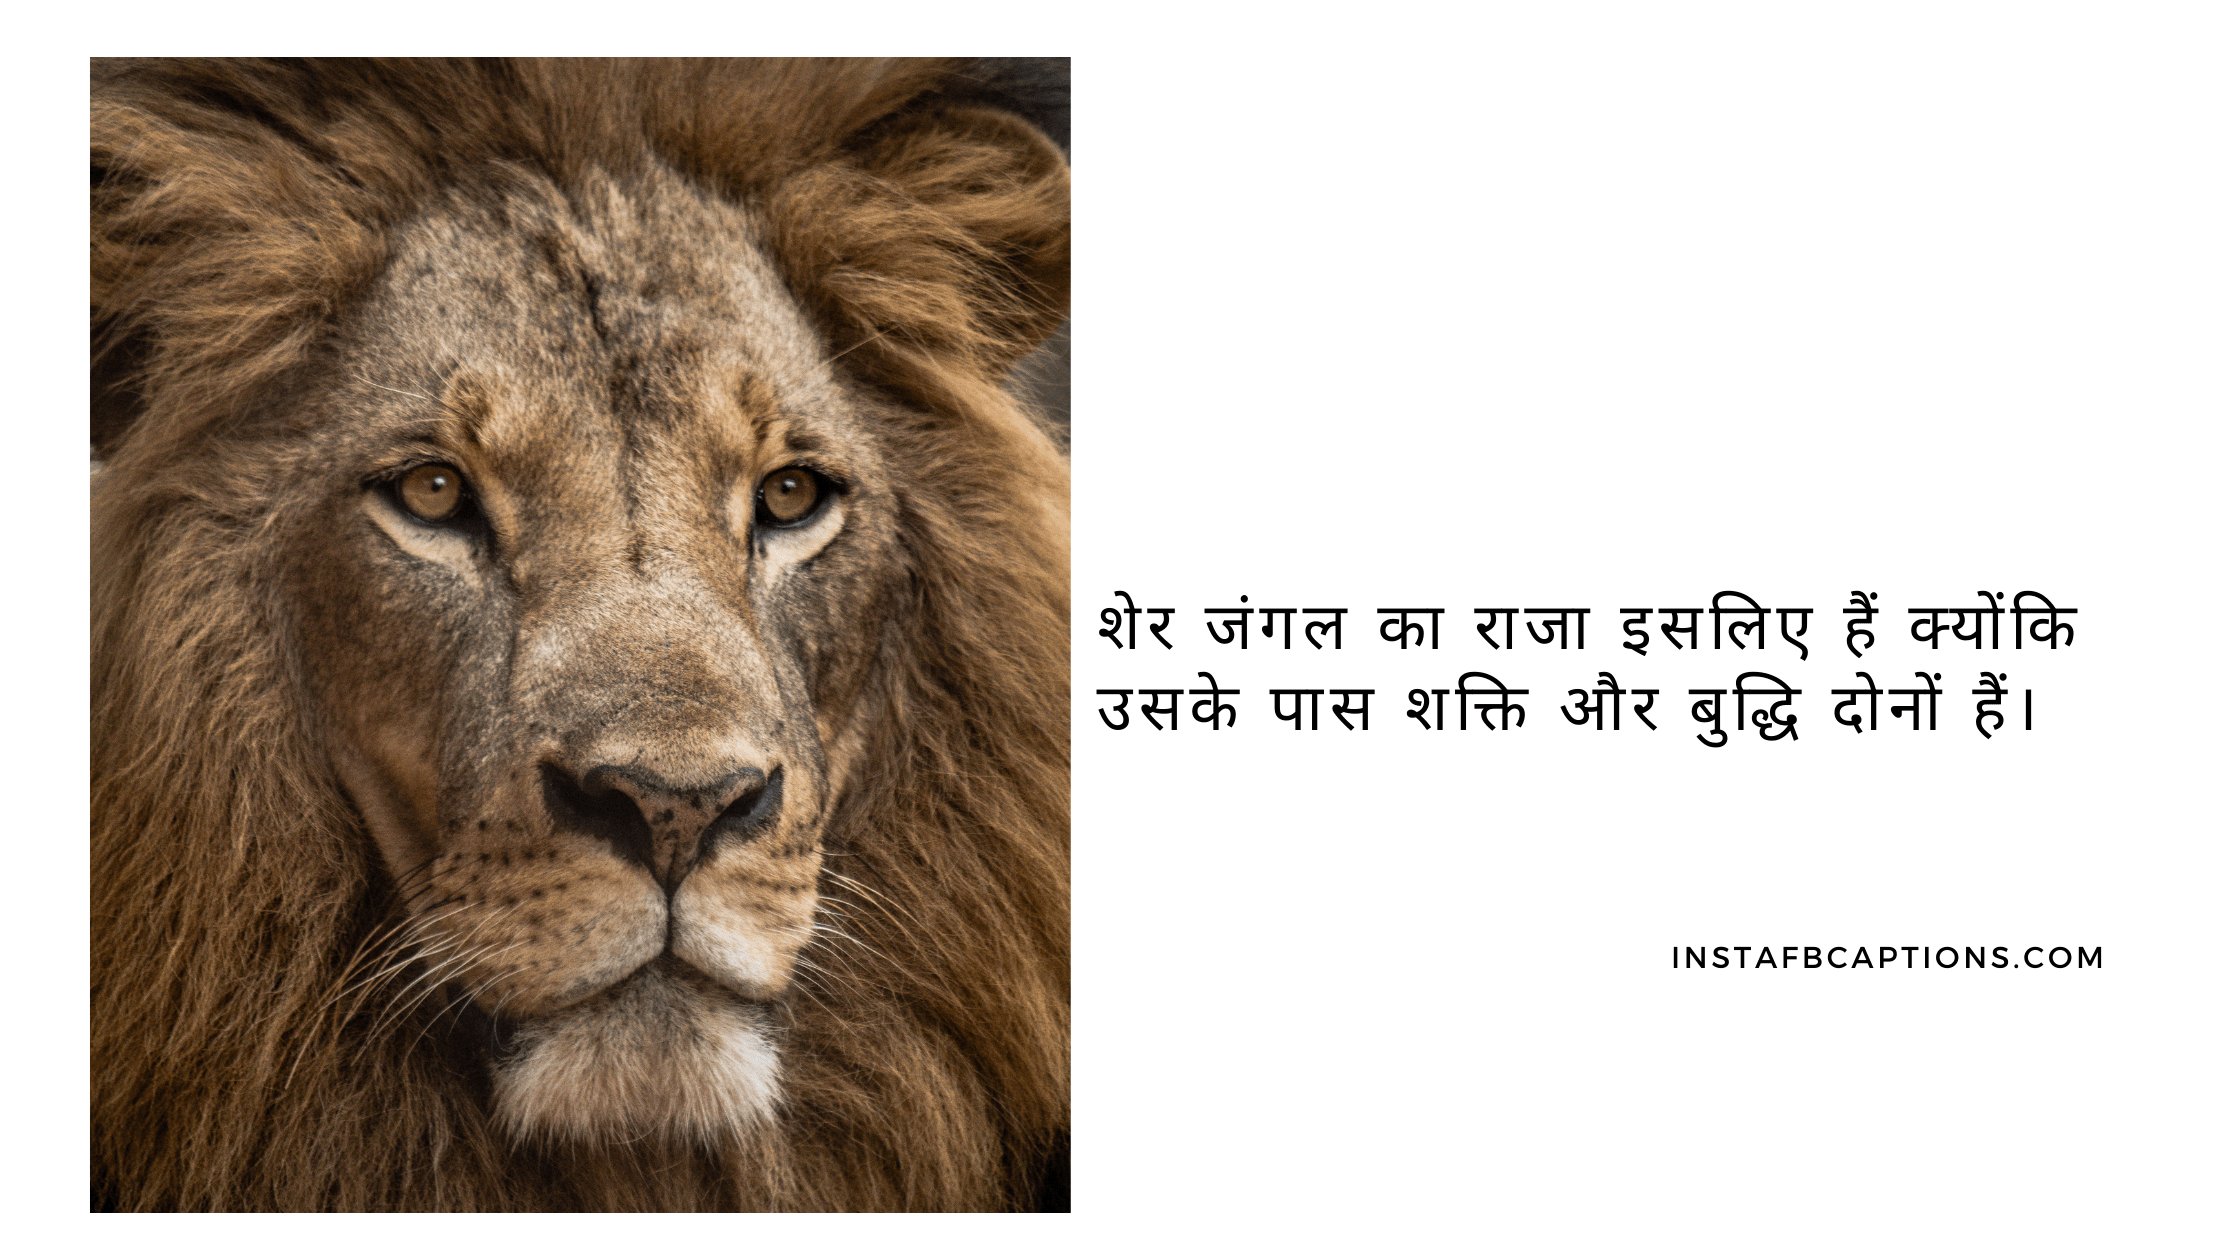 Amazing Lion King Captions In Hindi For Instagram  - Amazing Lion King Captions in Hindi For Instagram - 98 King Captions For Instagram Photos in 2022